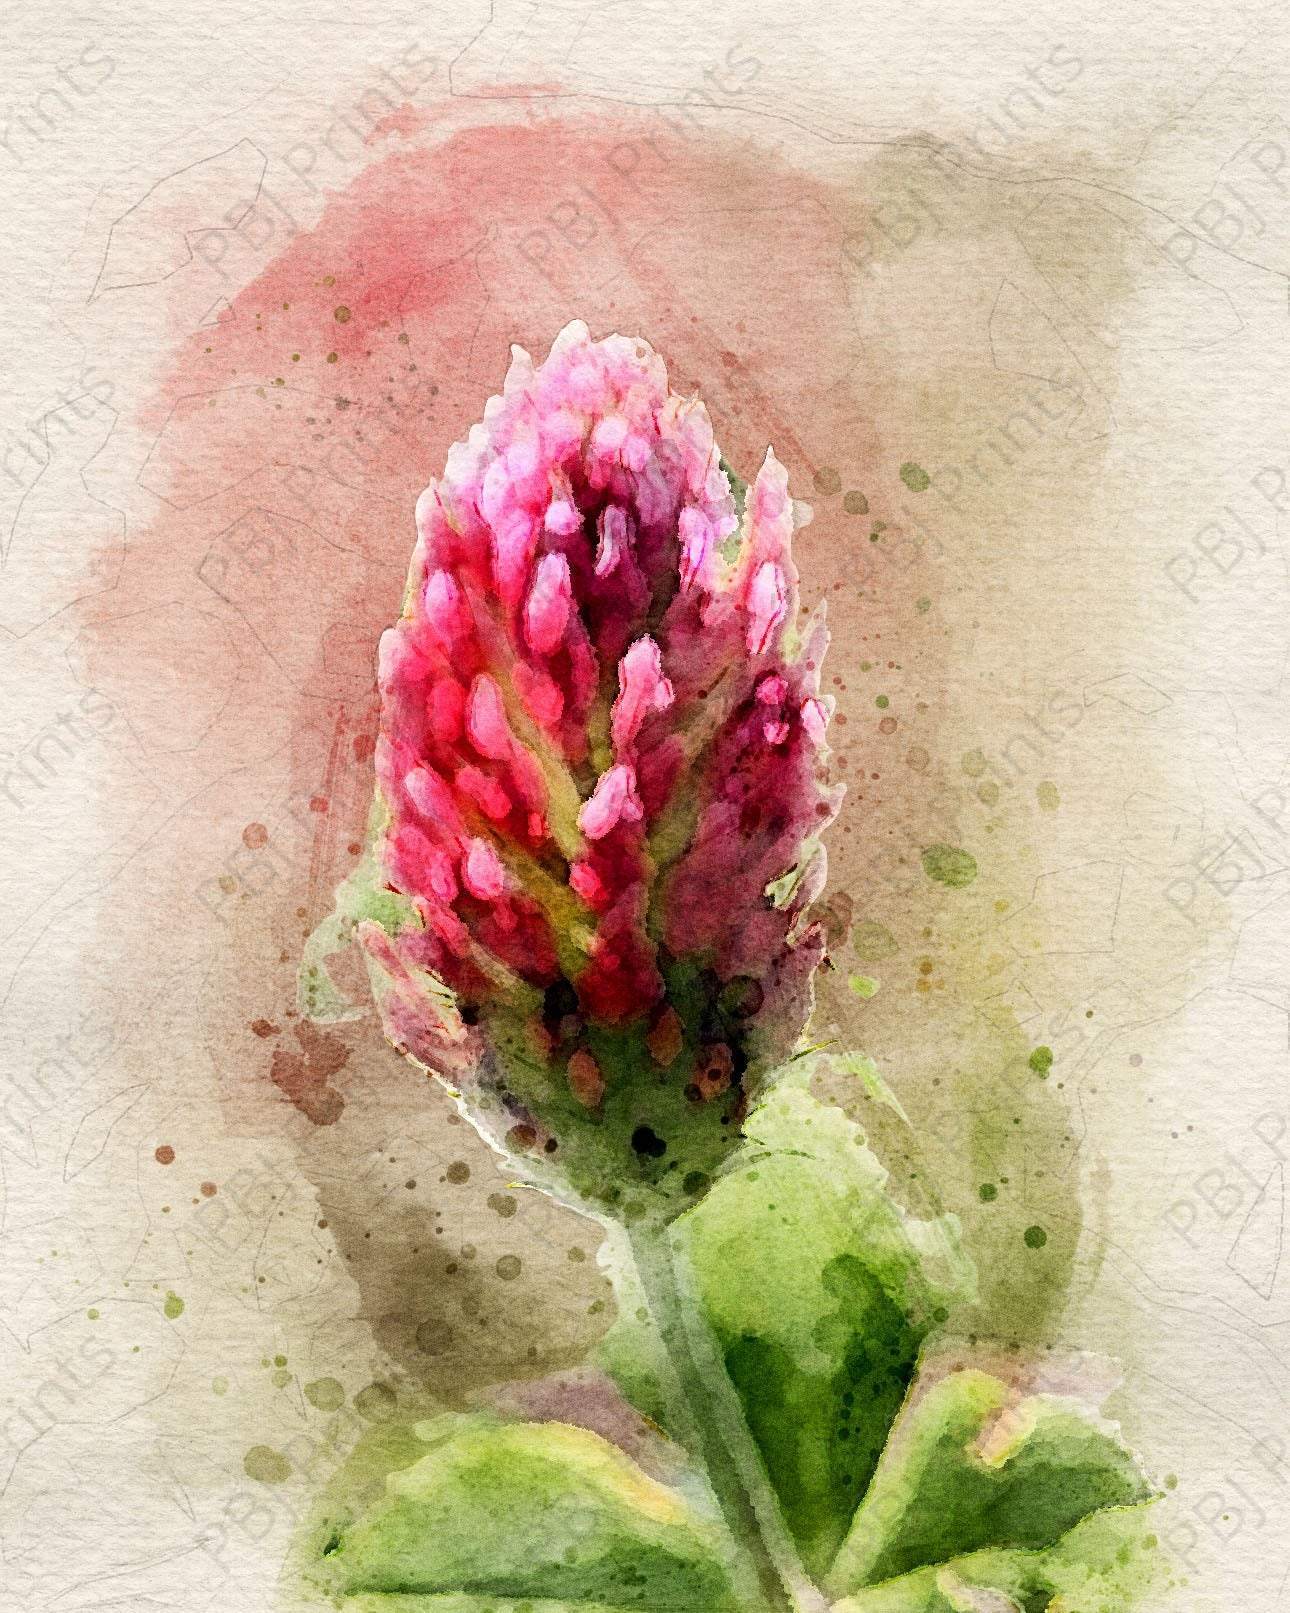 Crimson Clover Watercolor - Artist by Justin Rice - New Arrivals